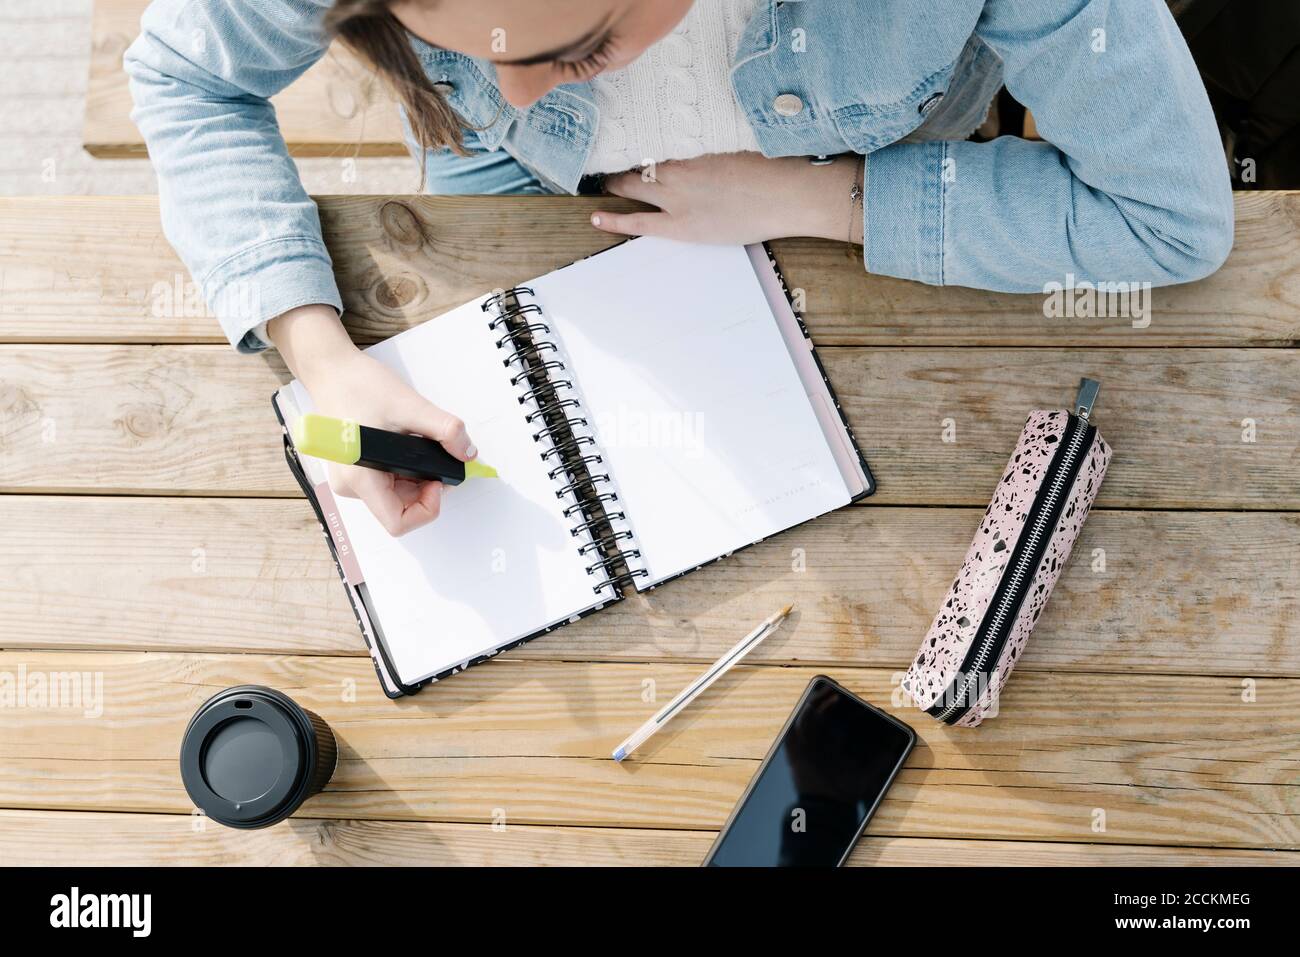 Student with felt tip pen and book at table Stock Photo